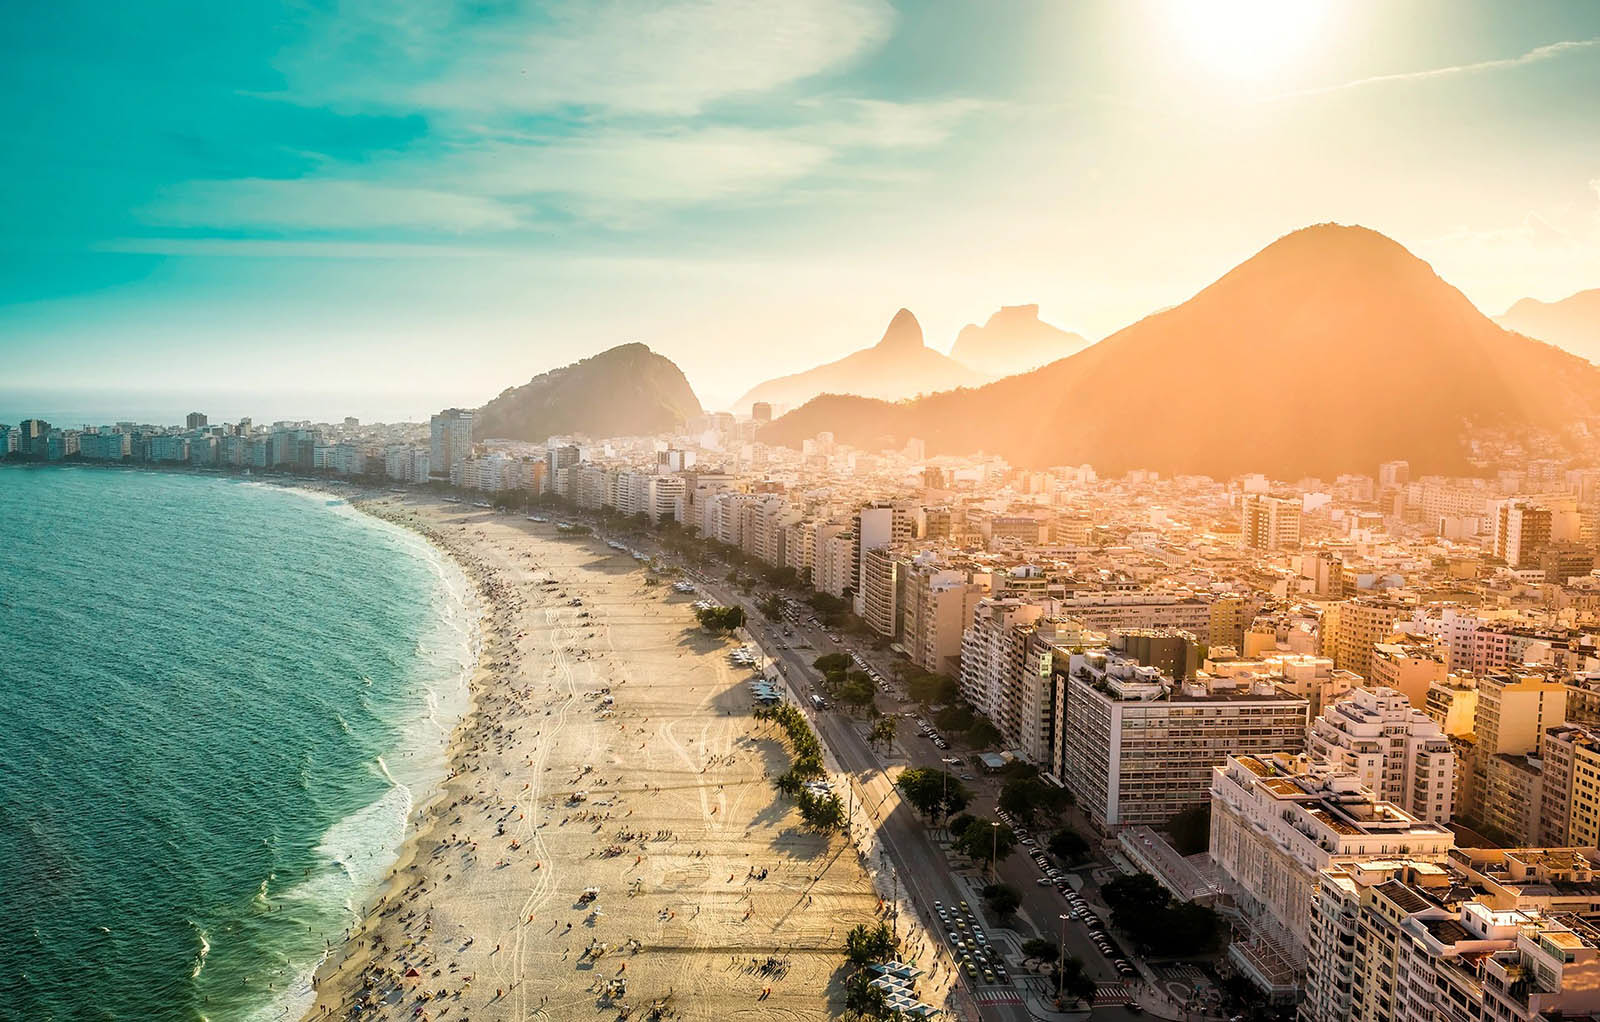 Can You Pass This 40-Question Geography Test That Gets Progressively Harder With Each Question? Copacabana Beach, Brazil